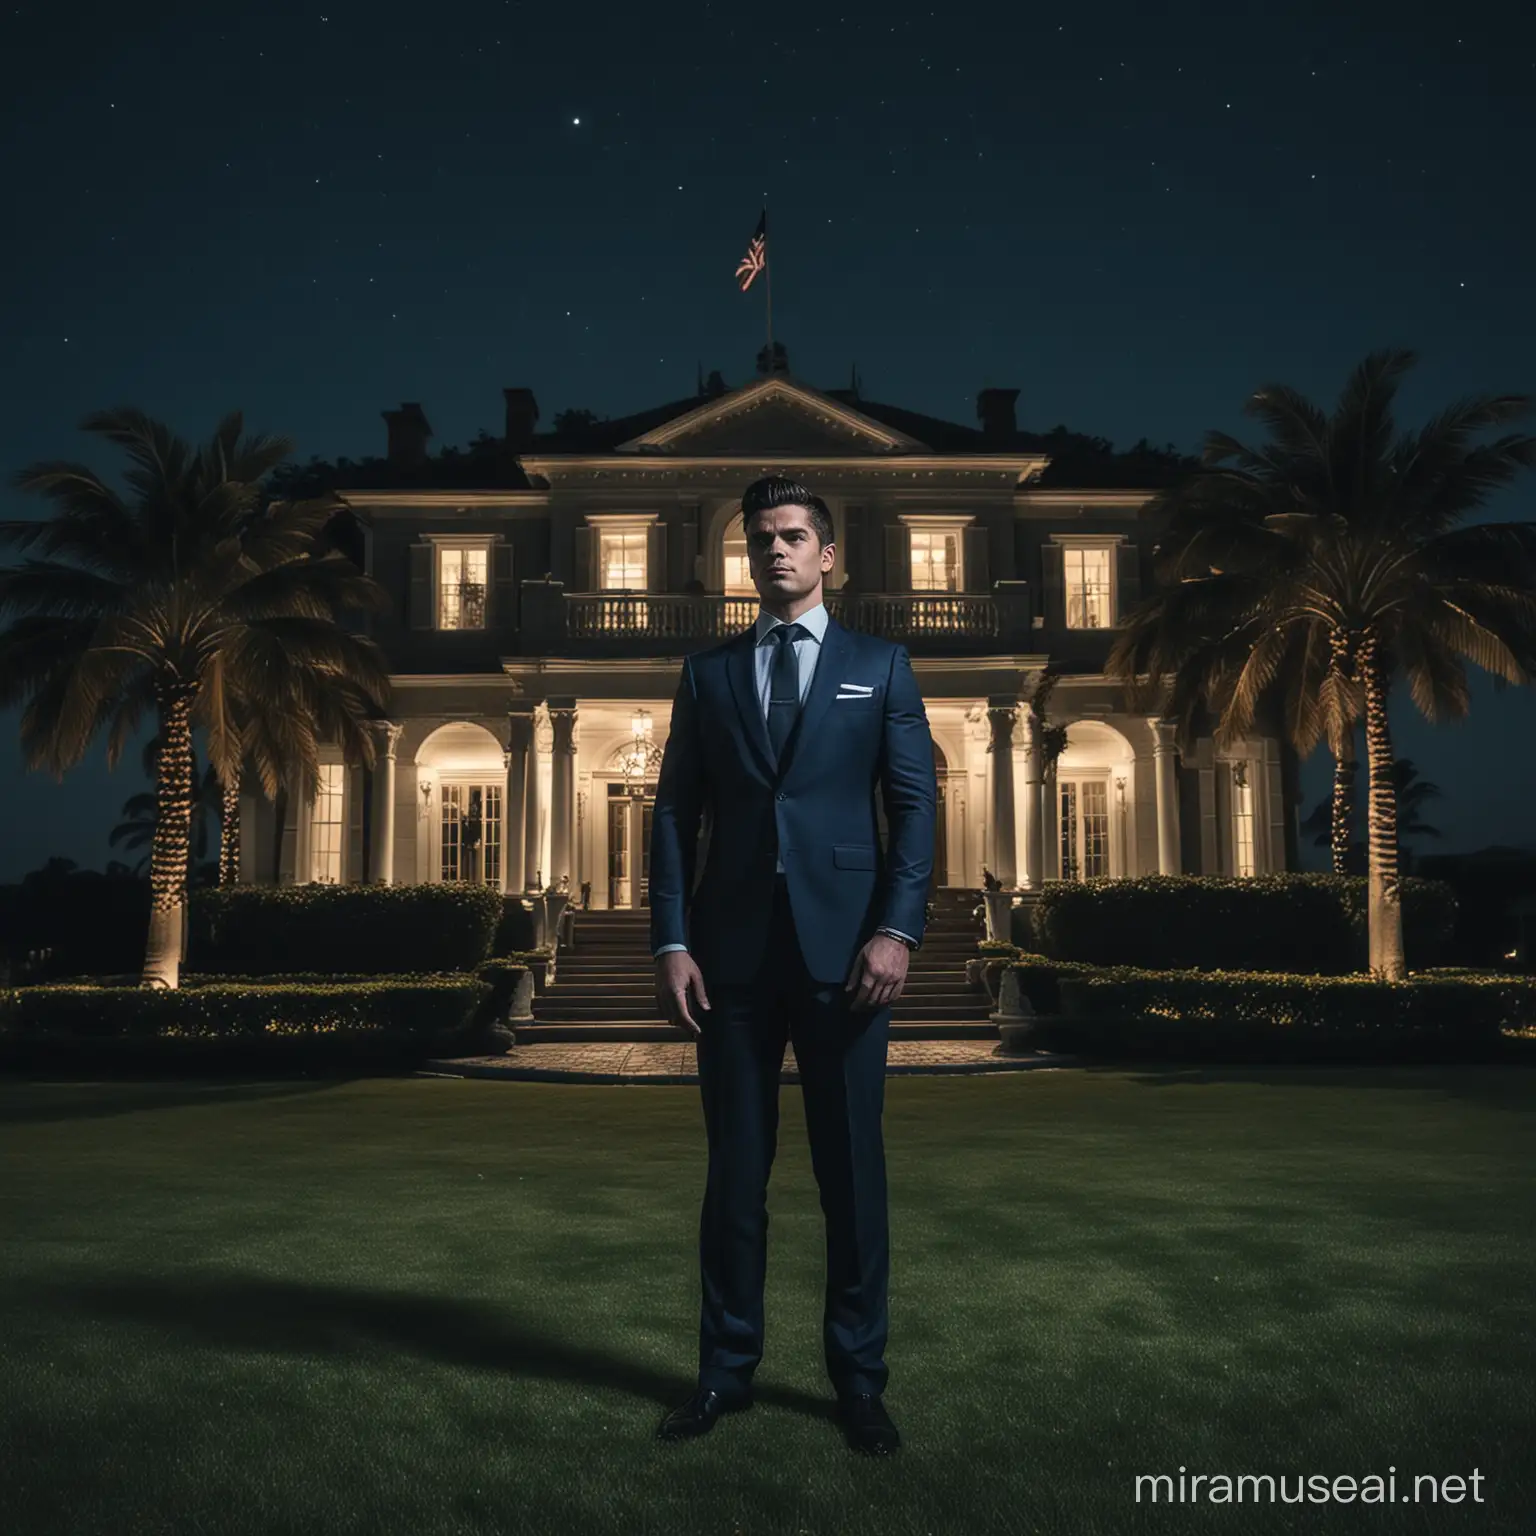 A bulked shredded man dressed in a suit standing confidently and prideful infrontof a mansion located at a small island, this man prides himself with owning the luxury resort,  image is taken at midnight with only moonlight to shine over the scene, there must be blue and silverish objects from the surroundings 